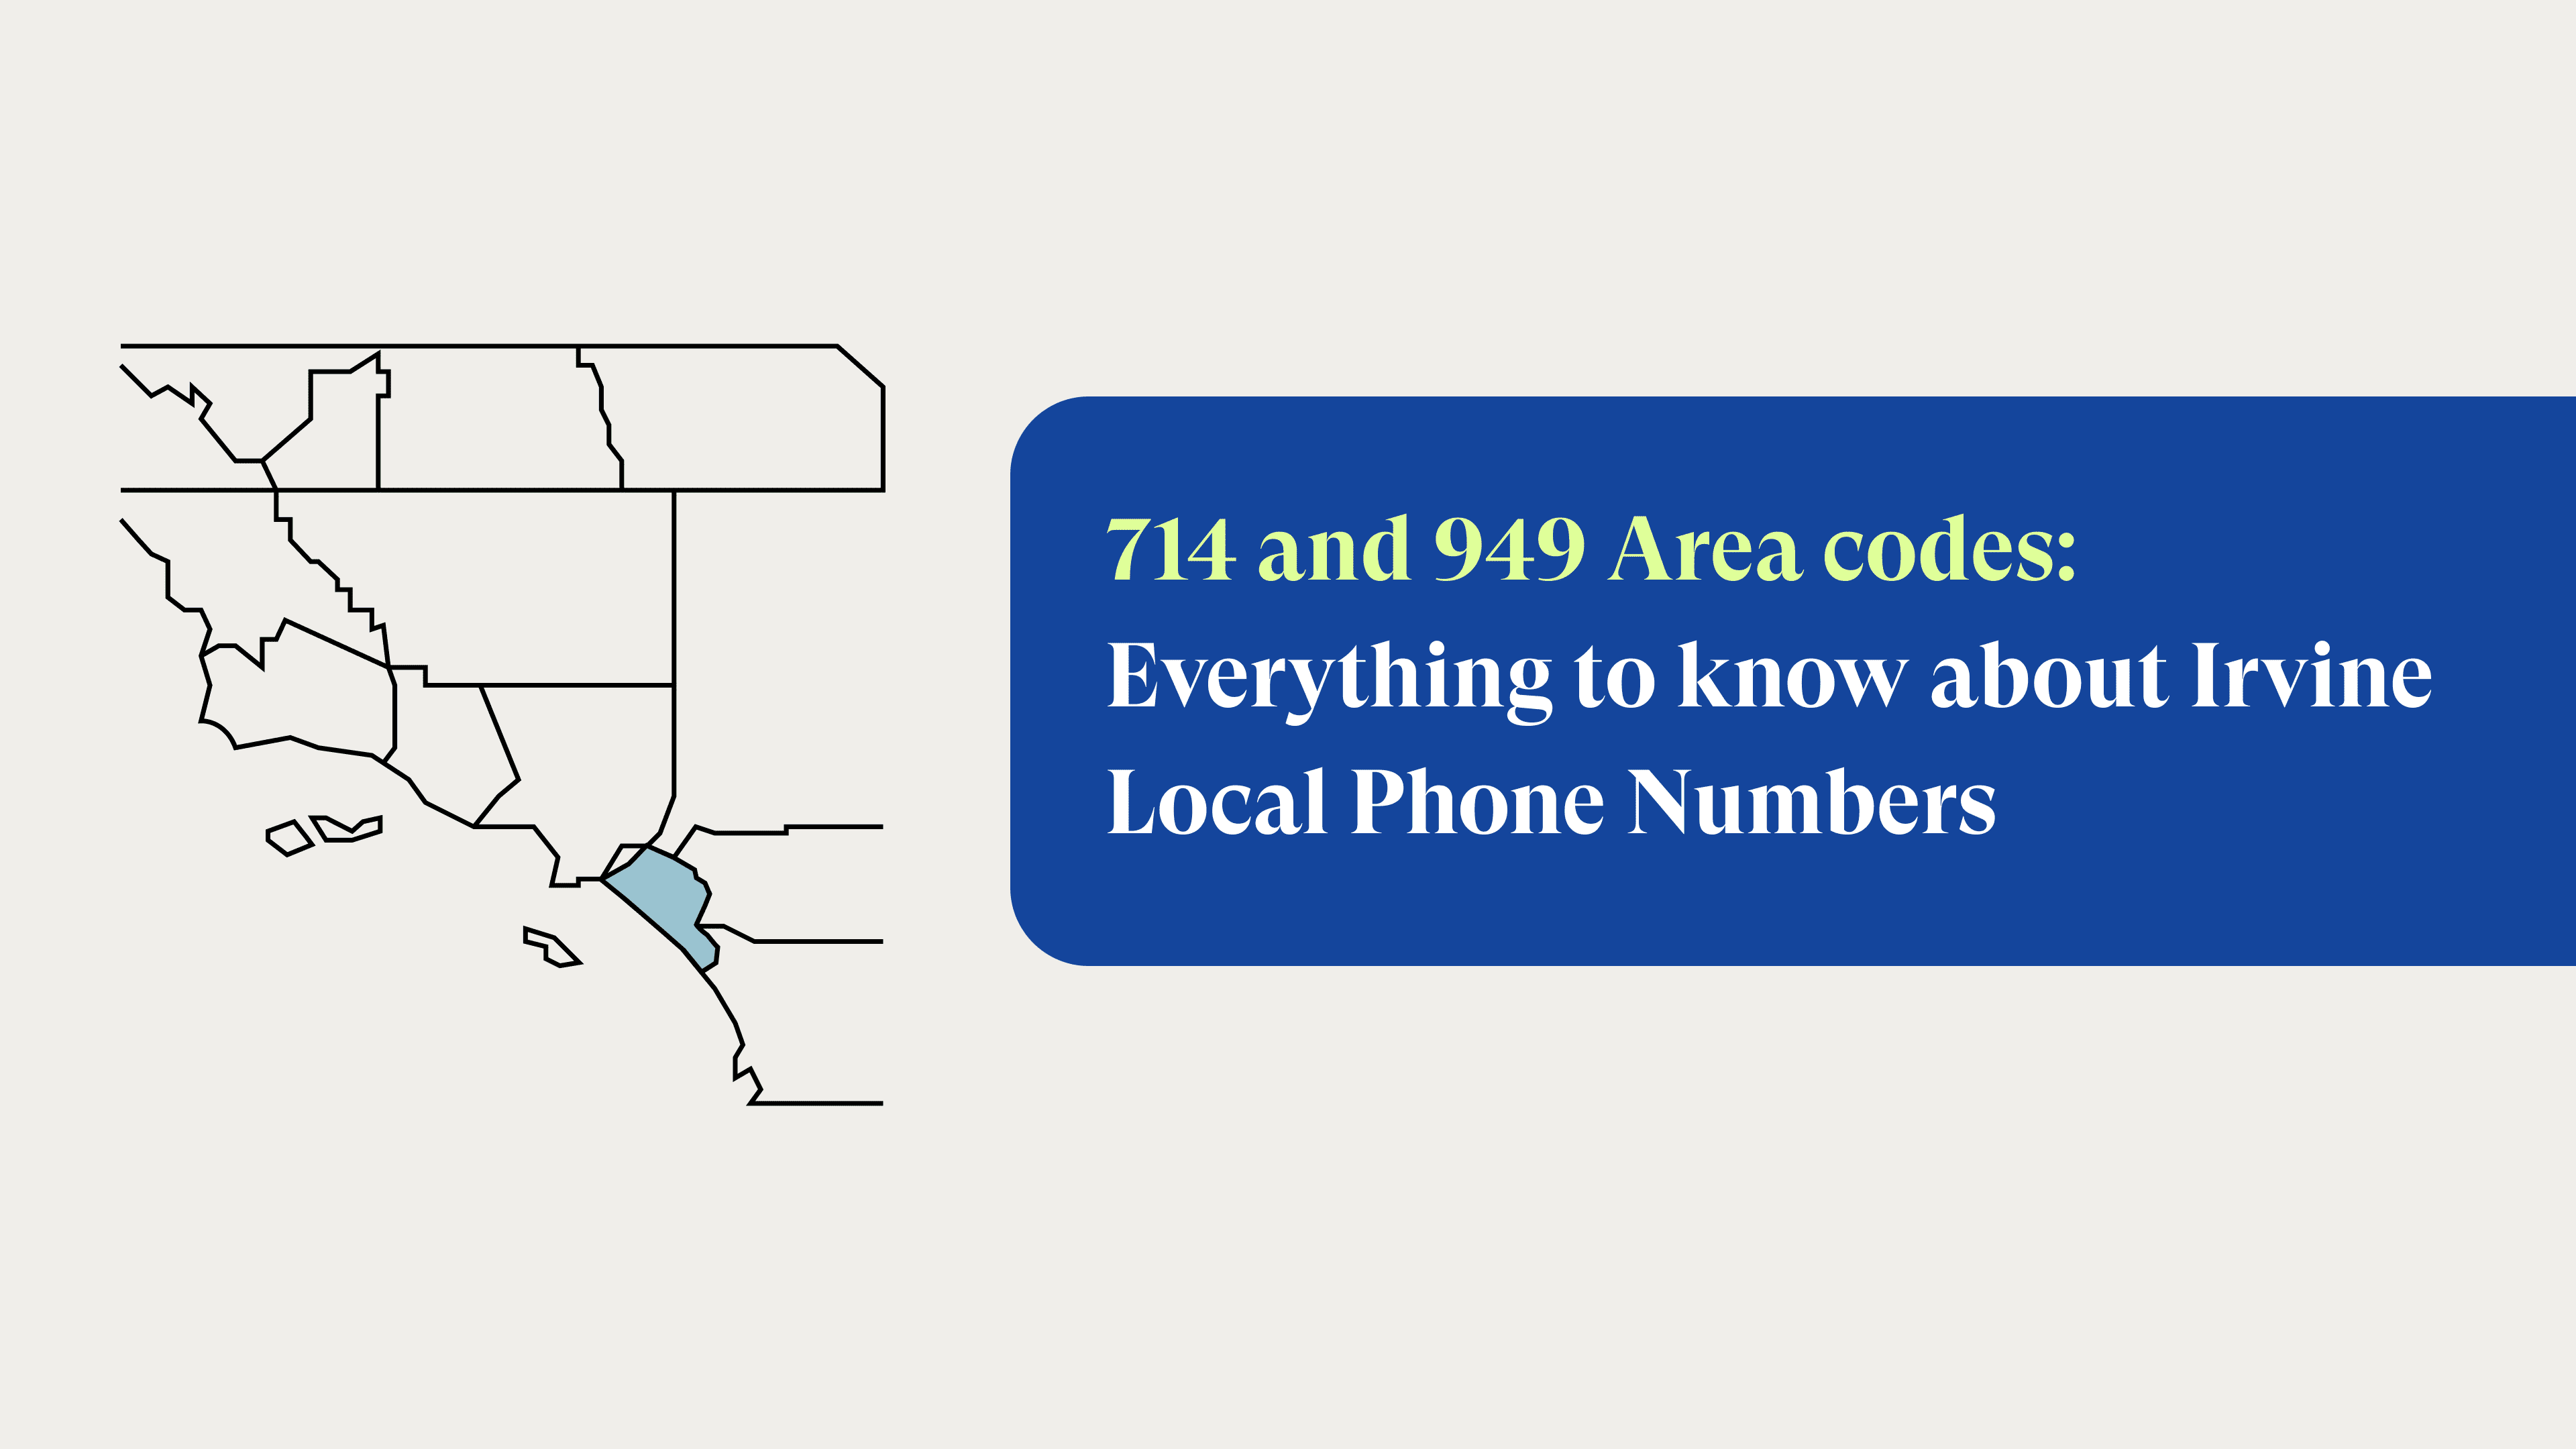 714 and 949 Area codes: Everything to know about Irvine Local Phone Numbers